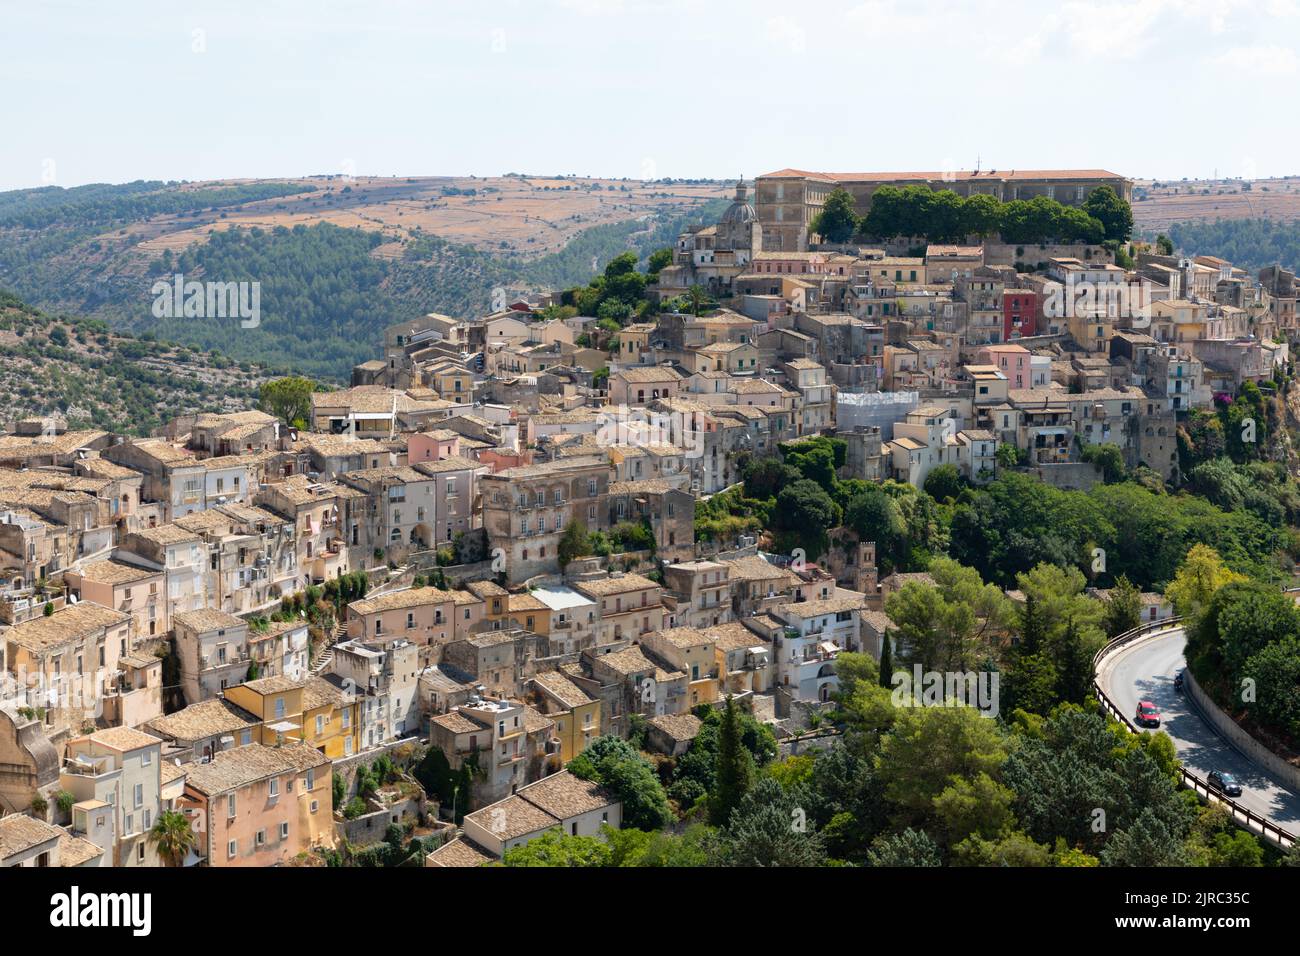 A view of the Sicilian hilltop town of Ragusa, highlighting the historic centre of Ragusa Ibla. Stock Photo